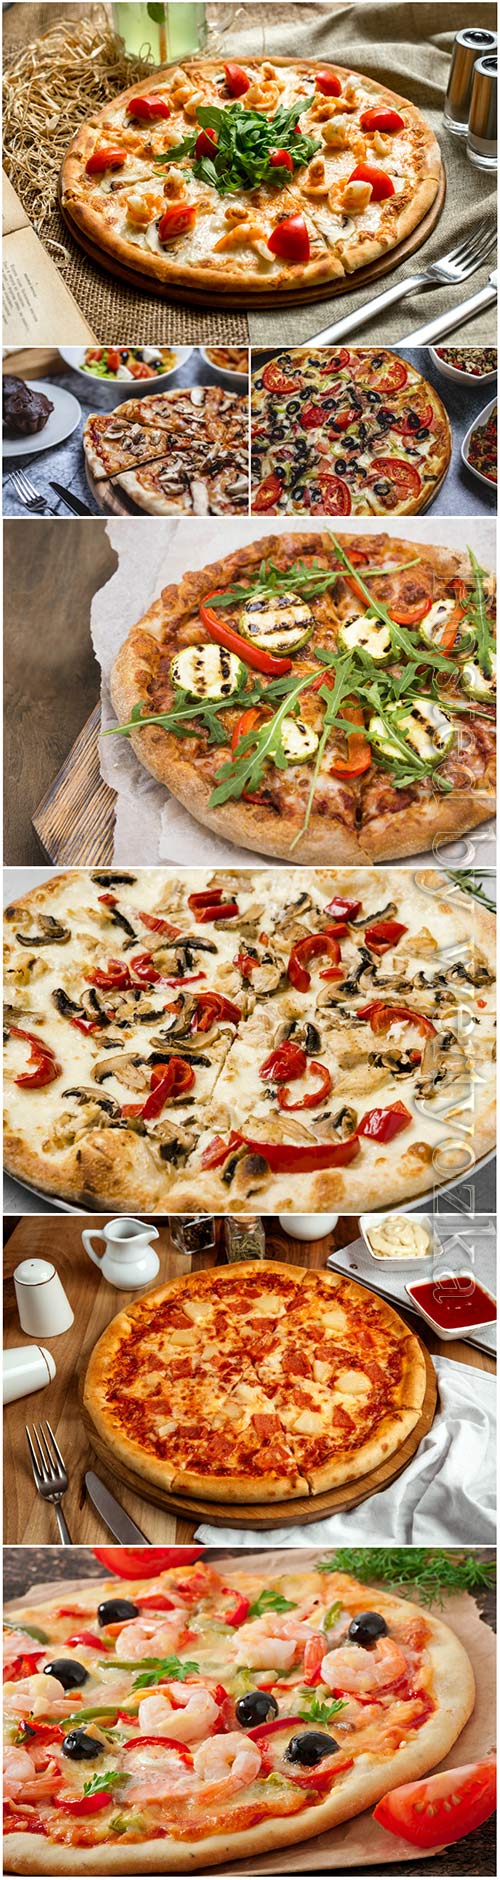 Pizza with meat, seafood, mushrooms and vegetables stock photo